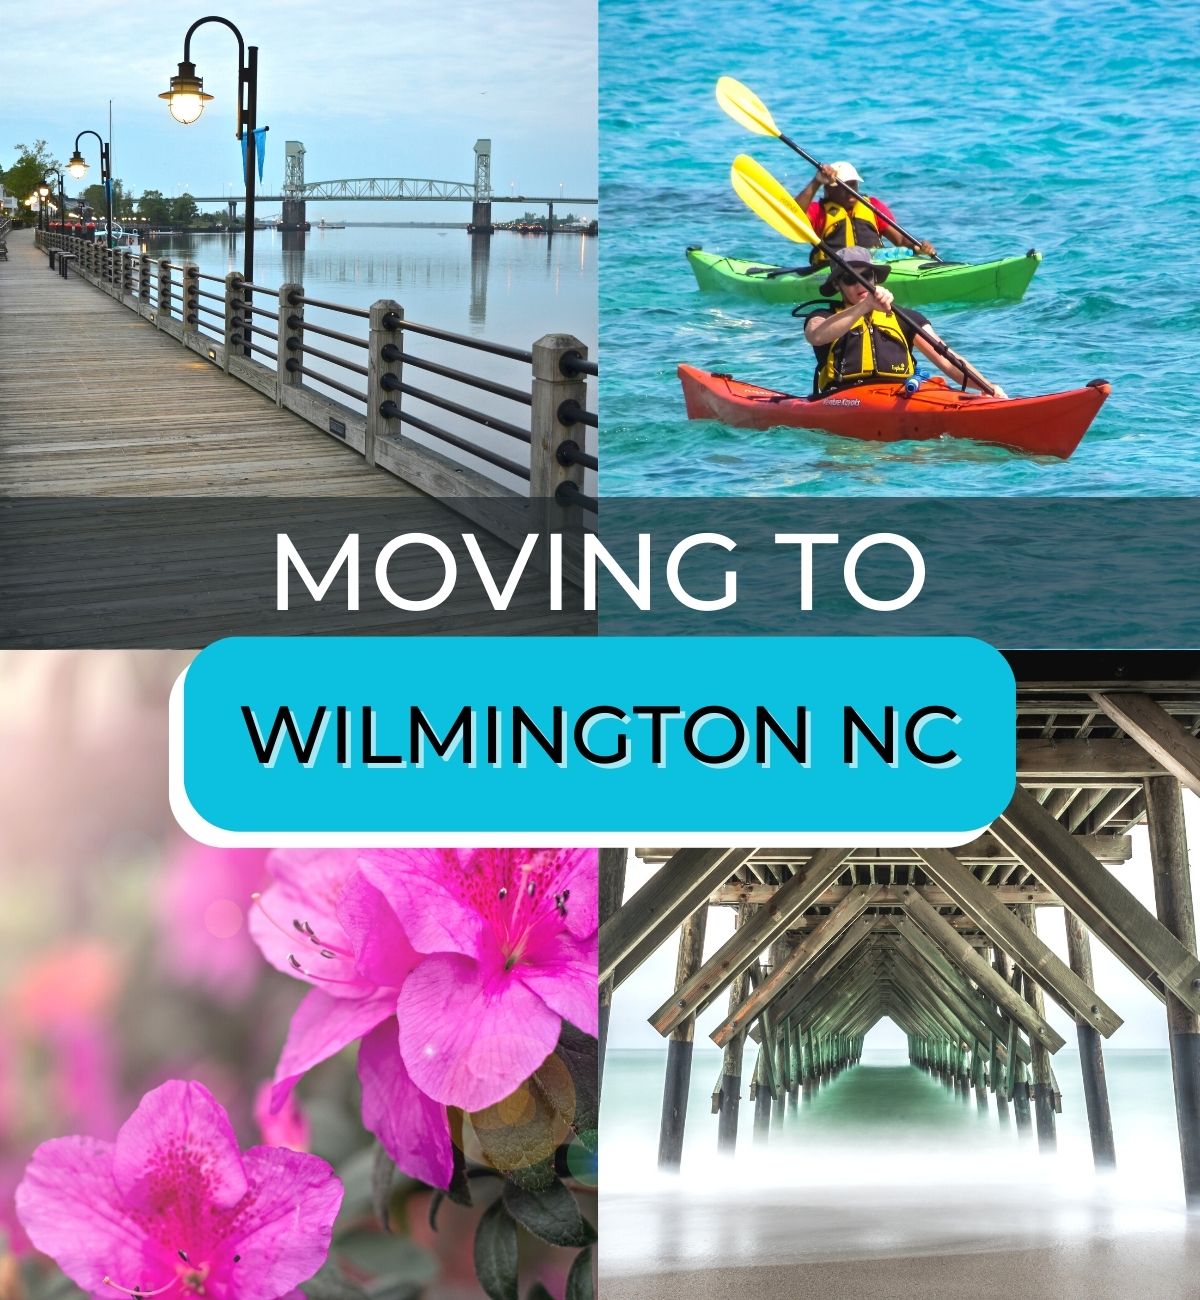 Moving to Wilmington, NC